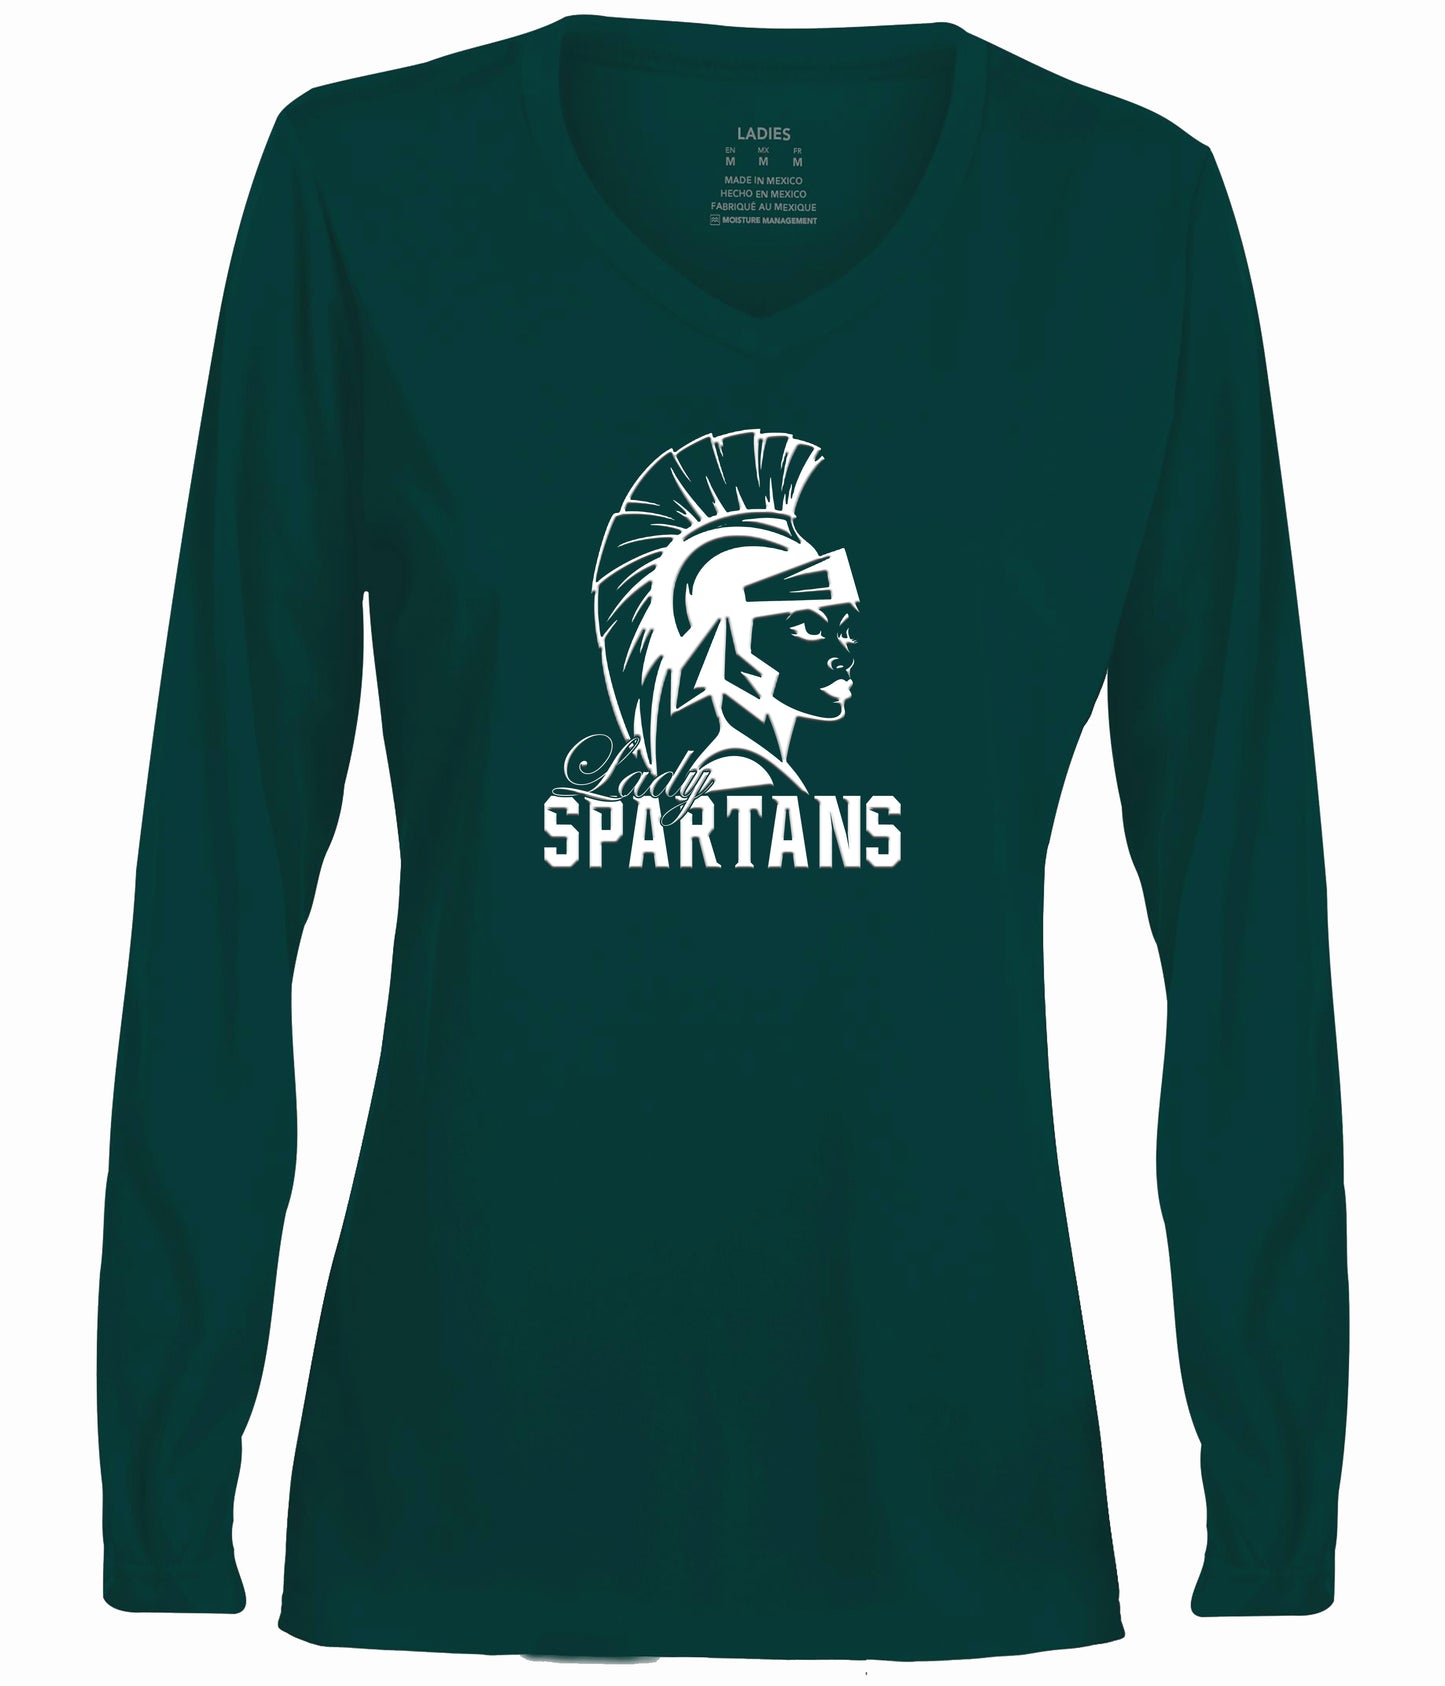 Lady Spartans